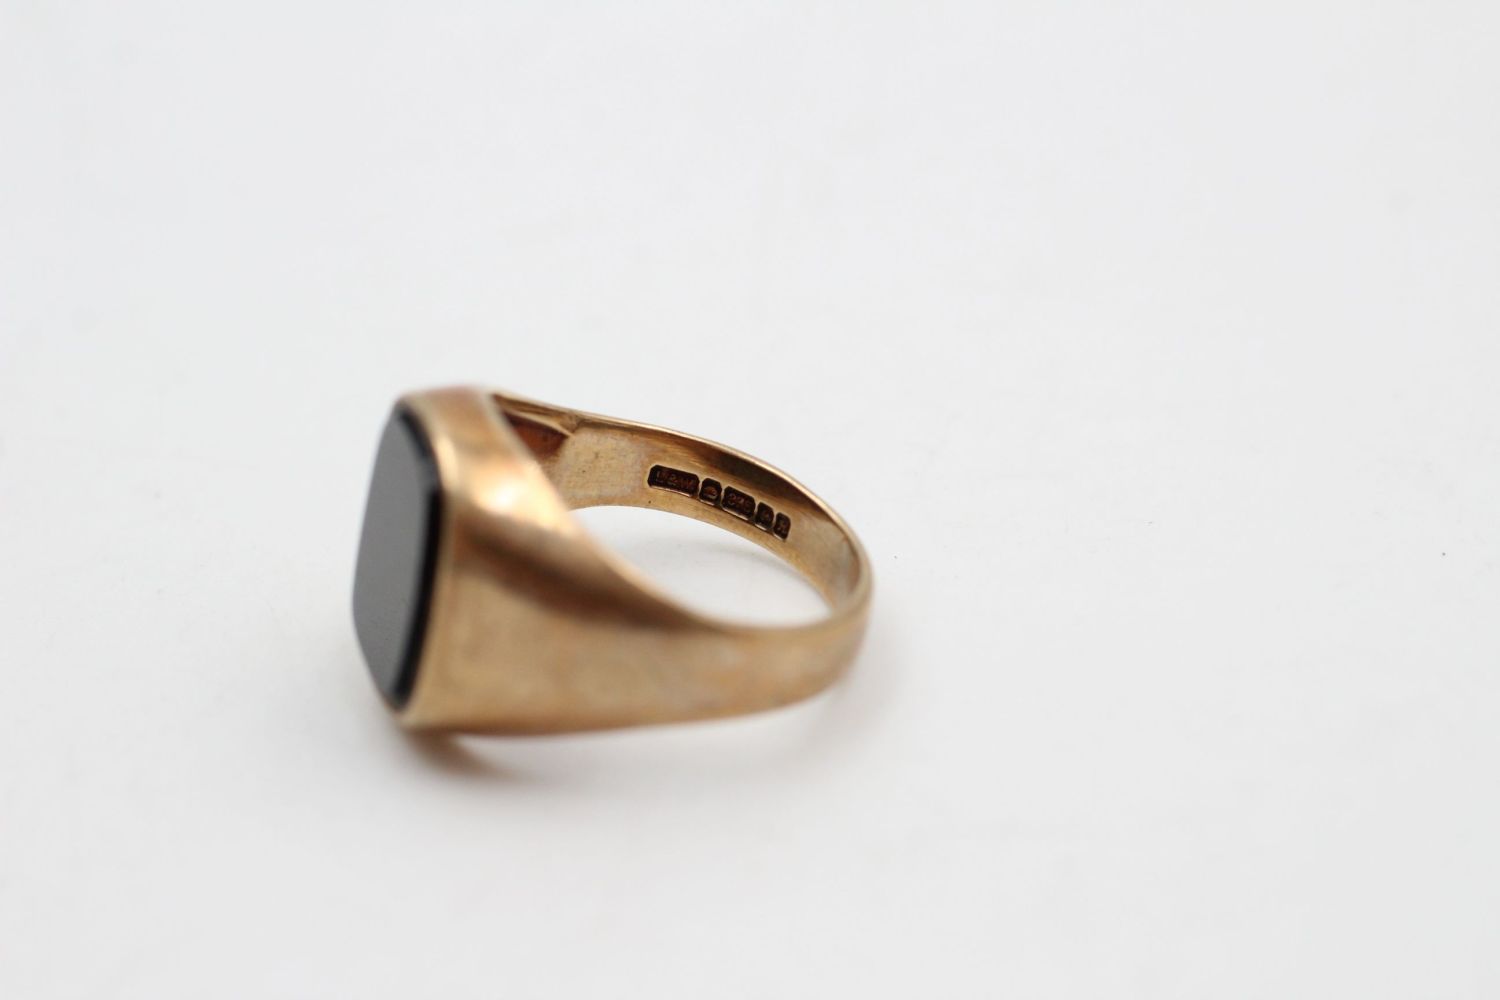 9ct Gold Signet Ring grams gross - Image 4 of 5